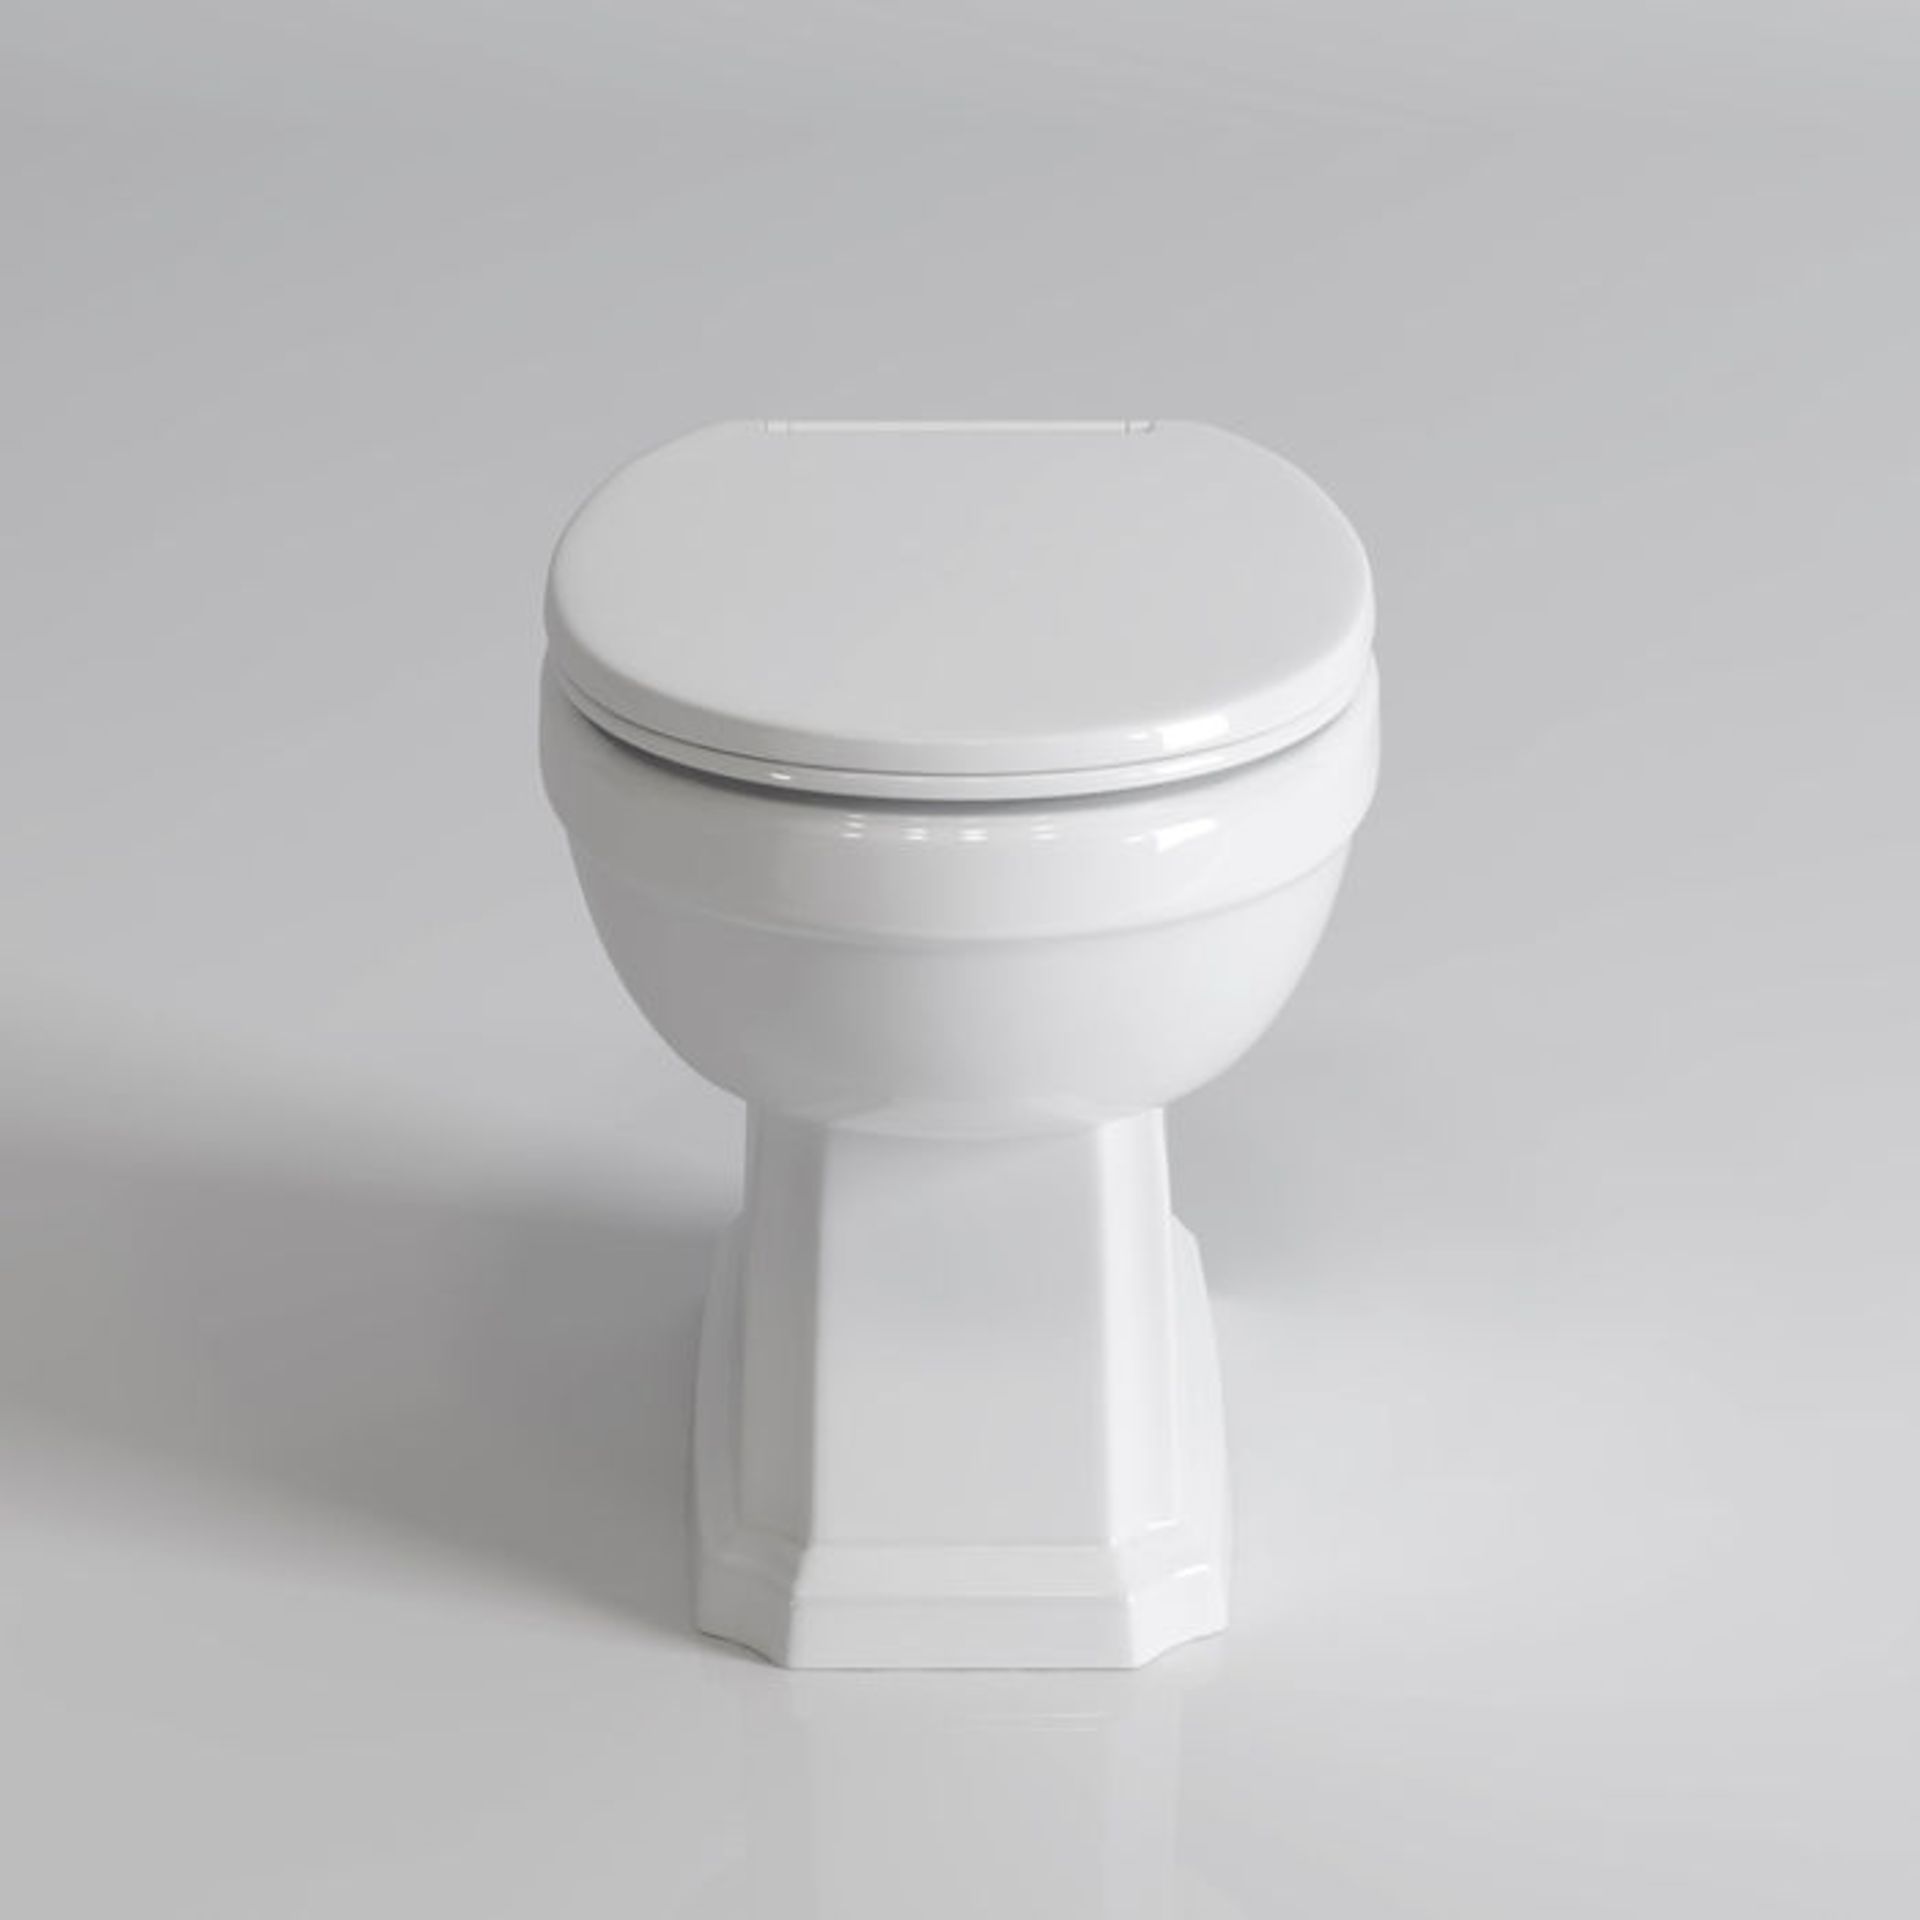 (M134) Victoria II Traditional Back To Wall Toilet - White Seat. RRP £324.99. Traditional features - Image 4 of 4